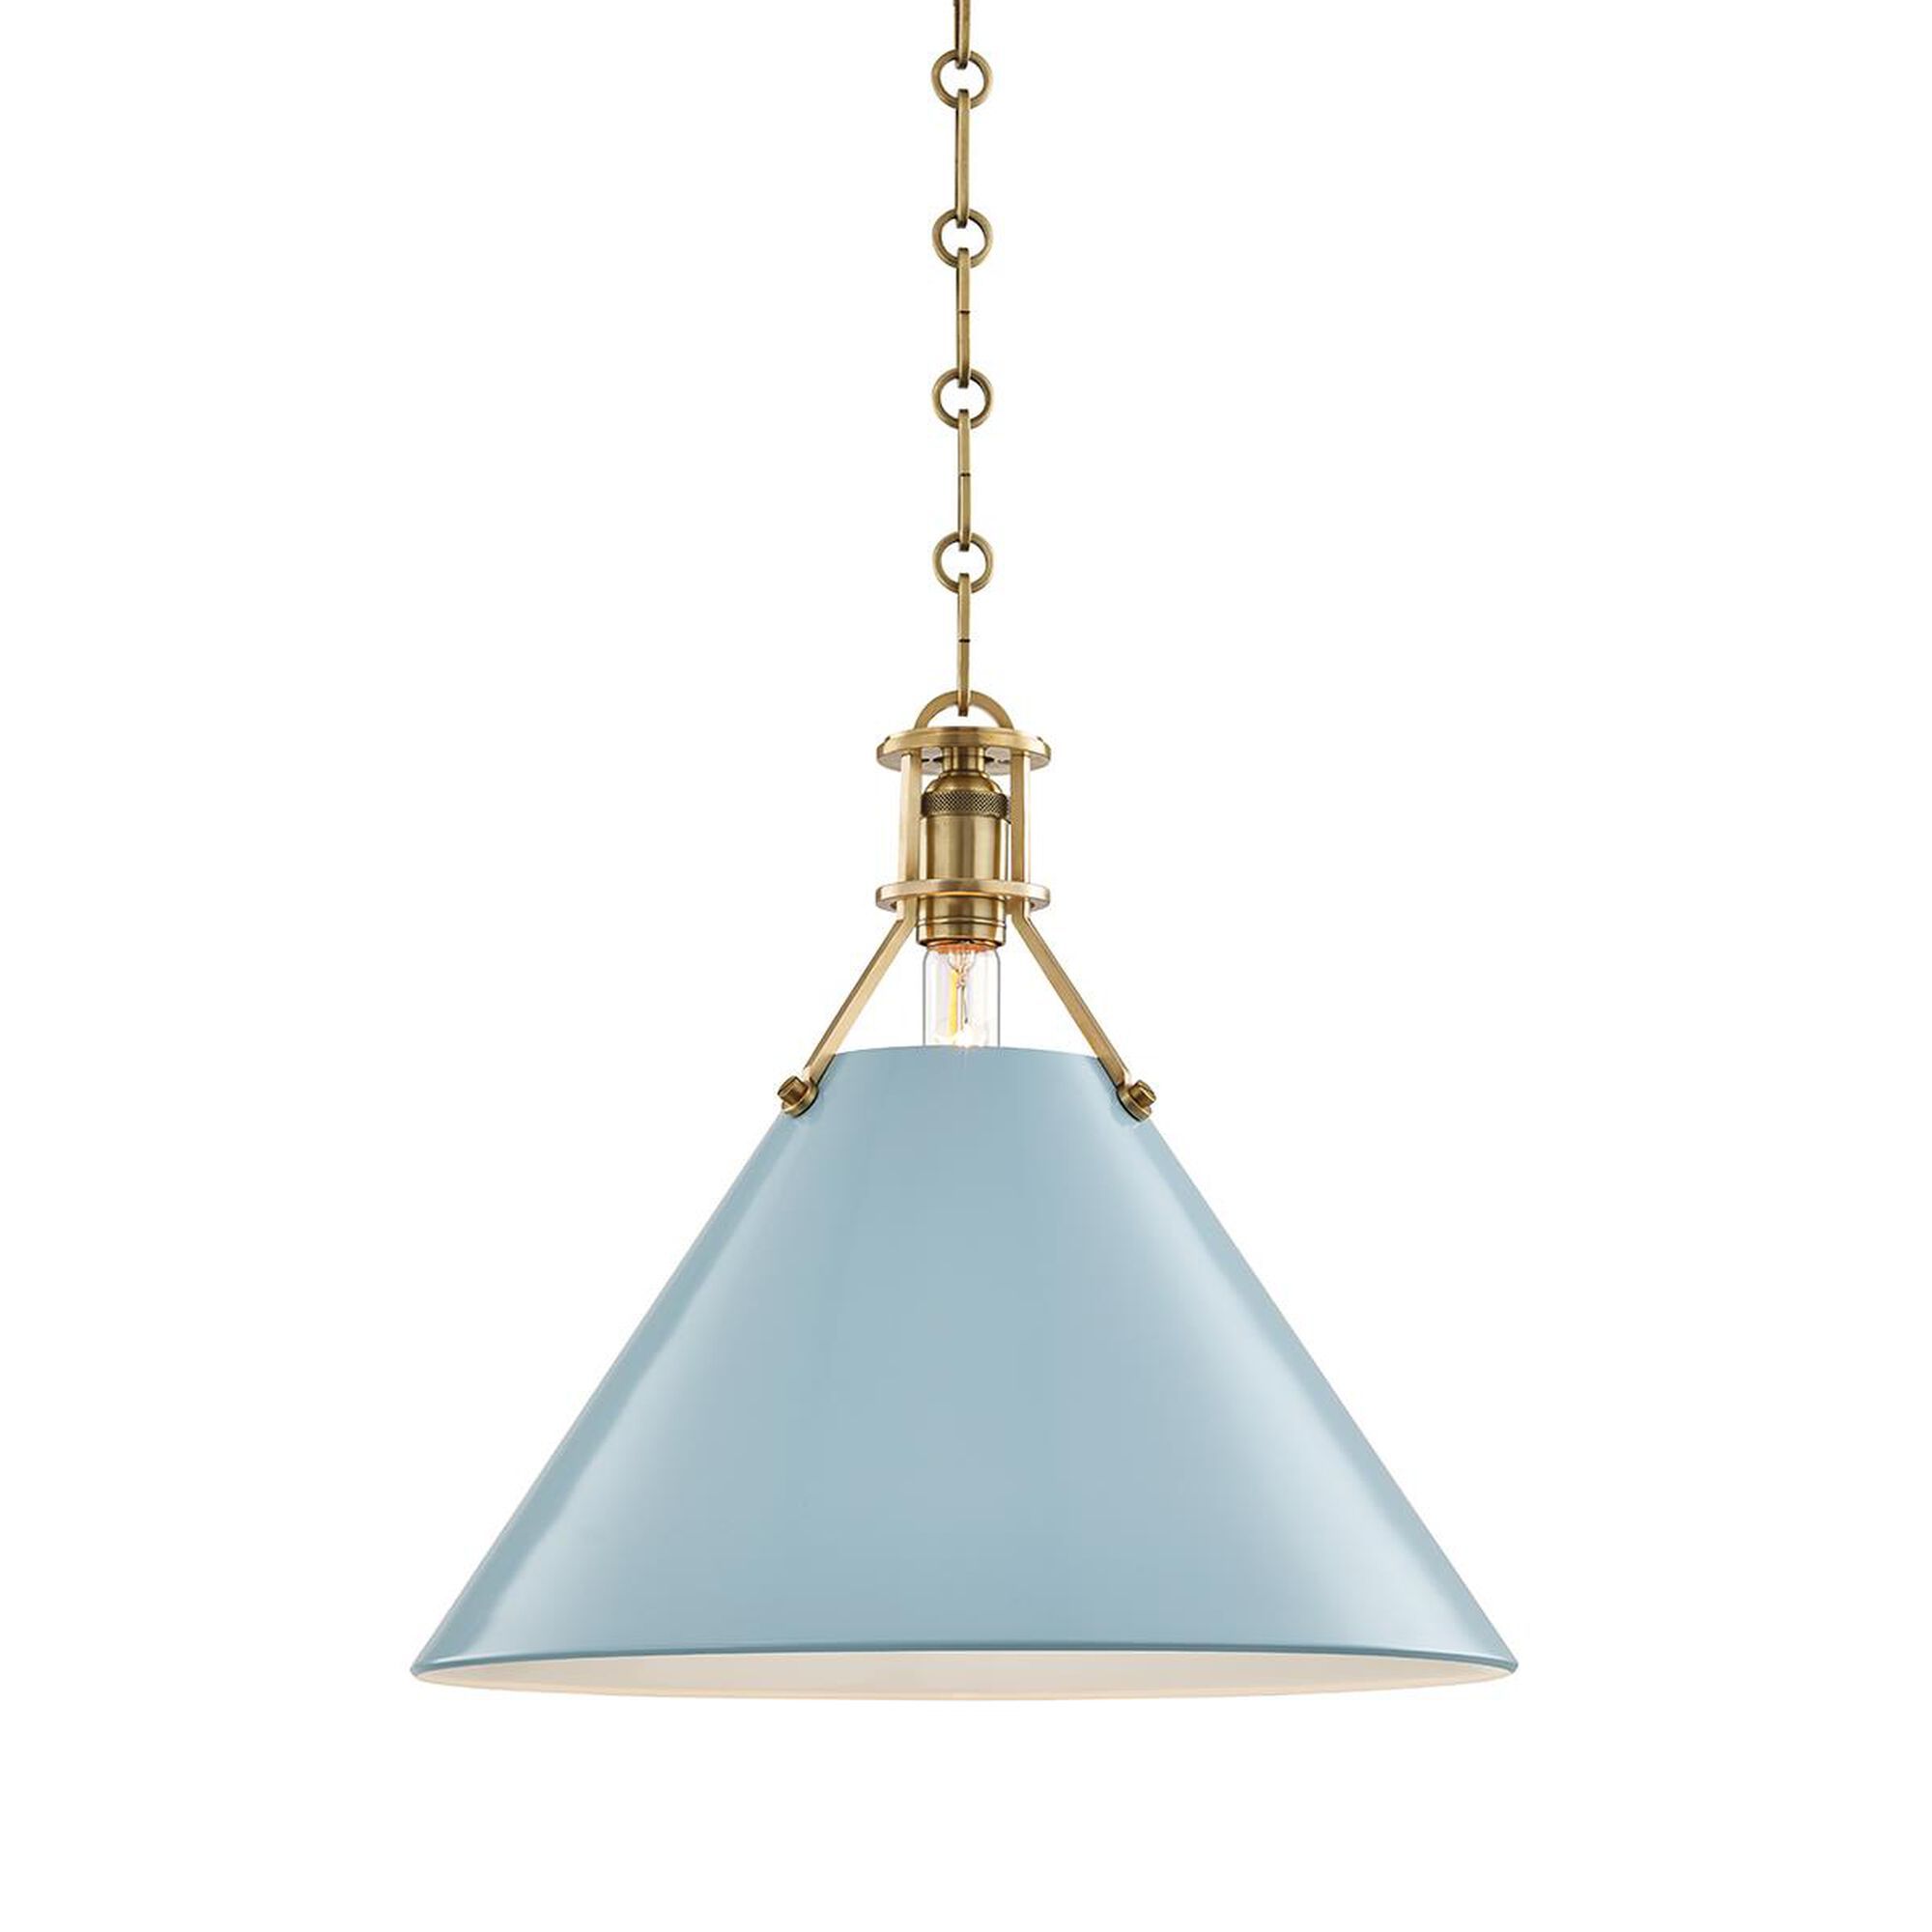 Hudson Valley Lighting Mark D. Sikes Painted No.2 Large Pendant | 1800 Lighting